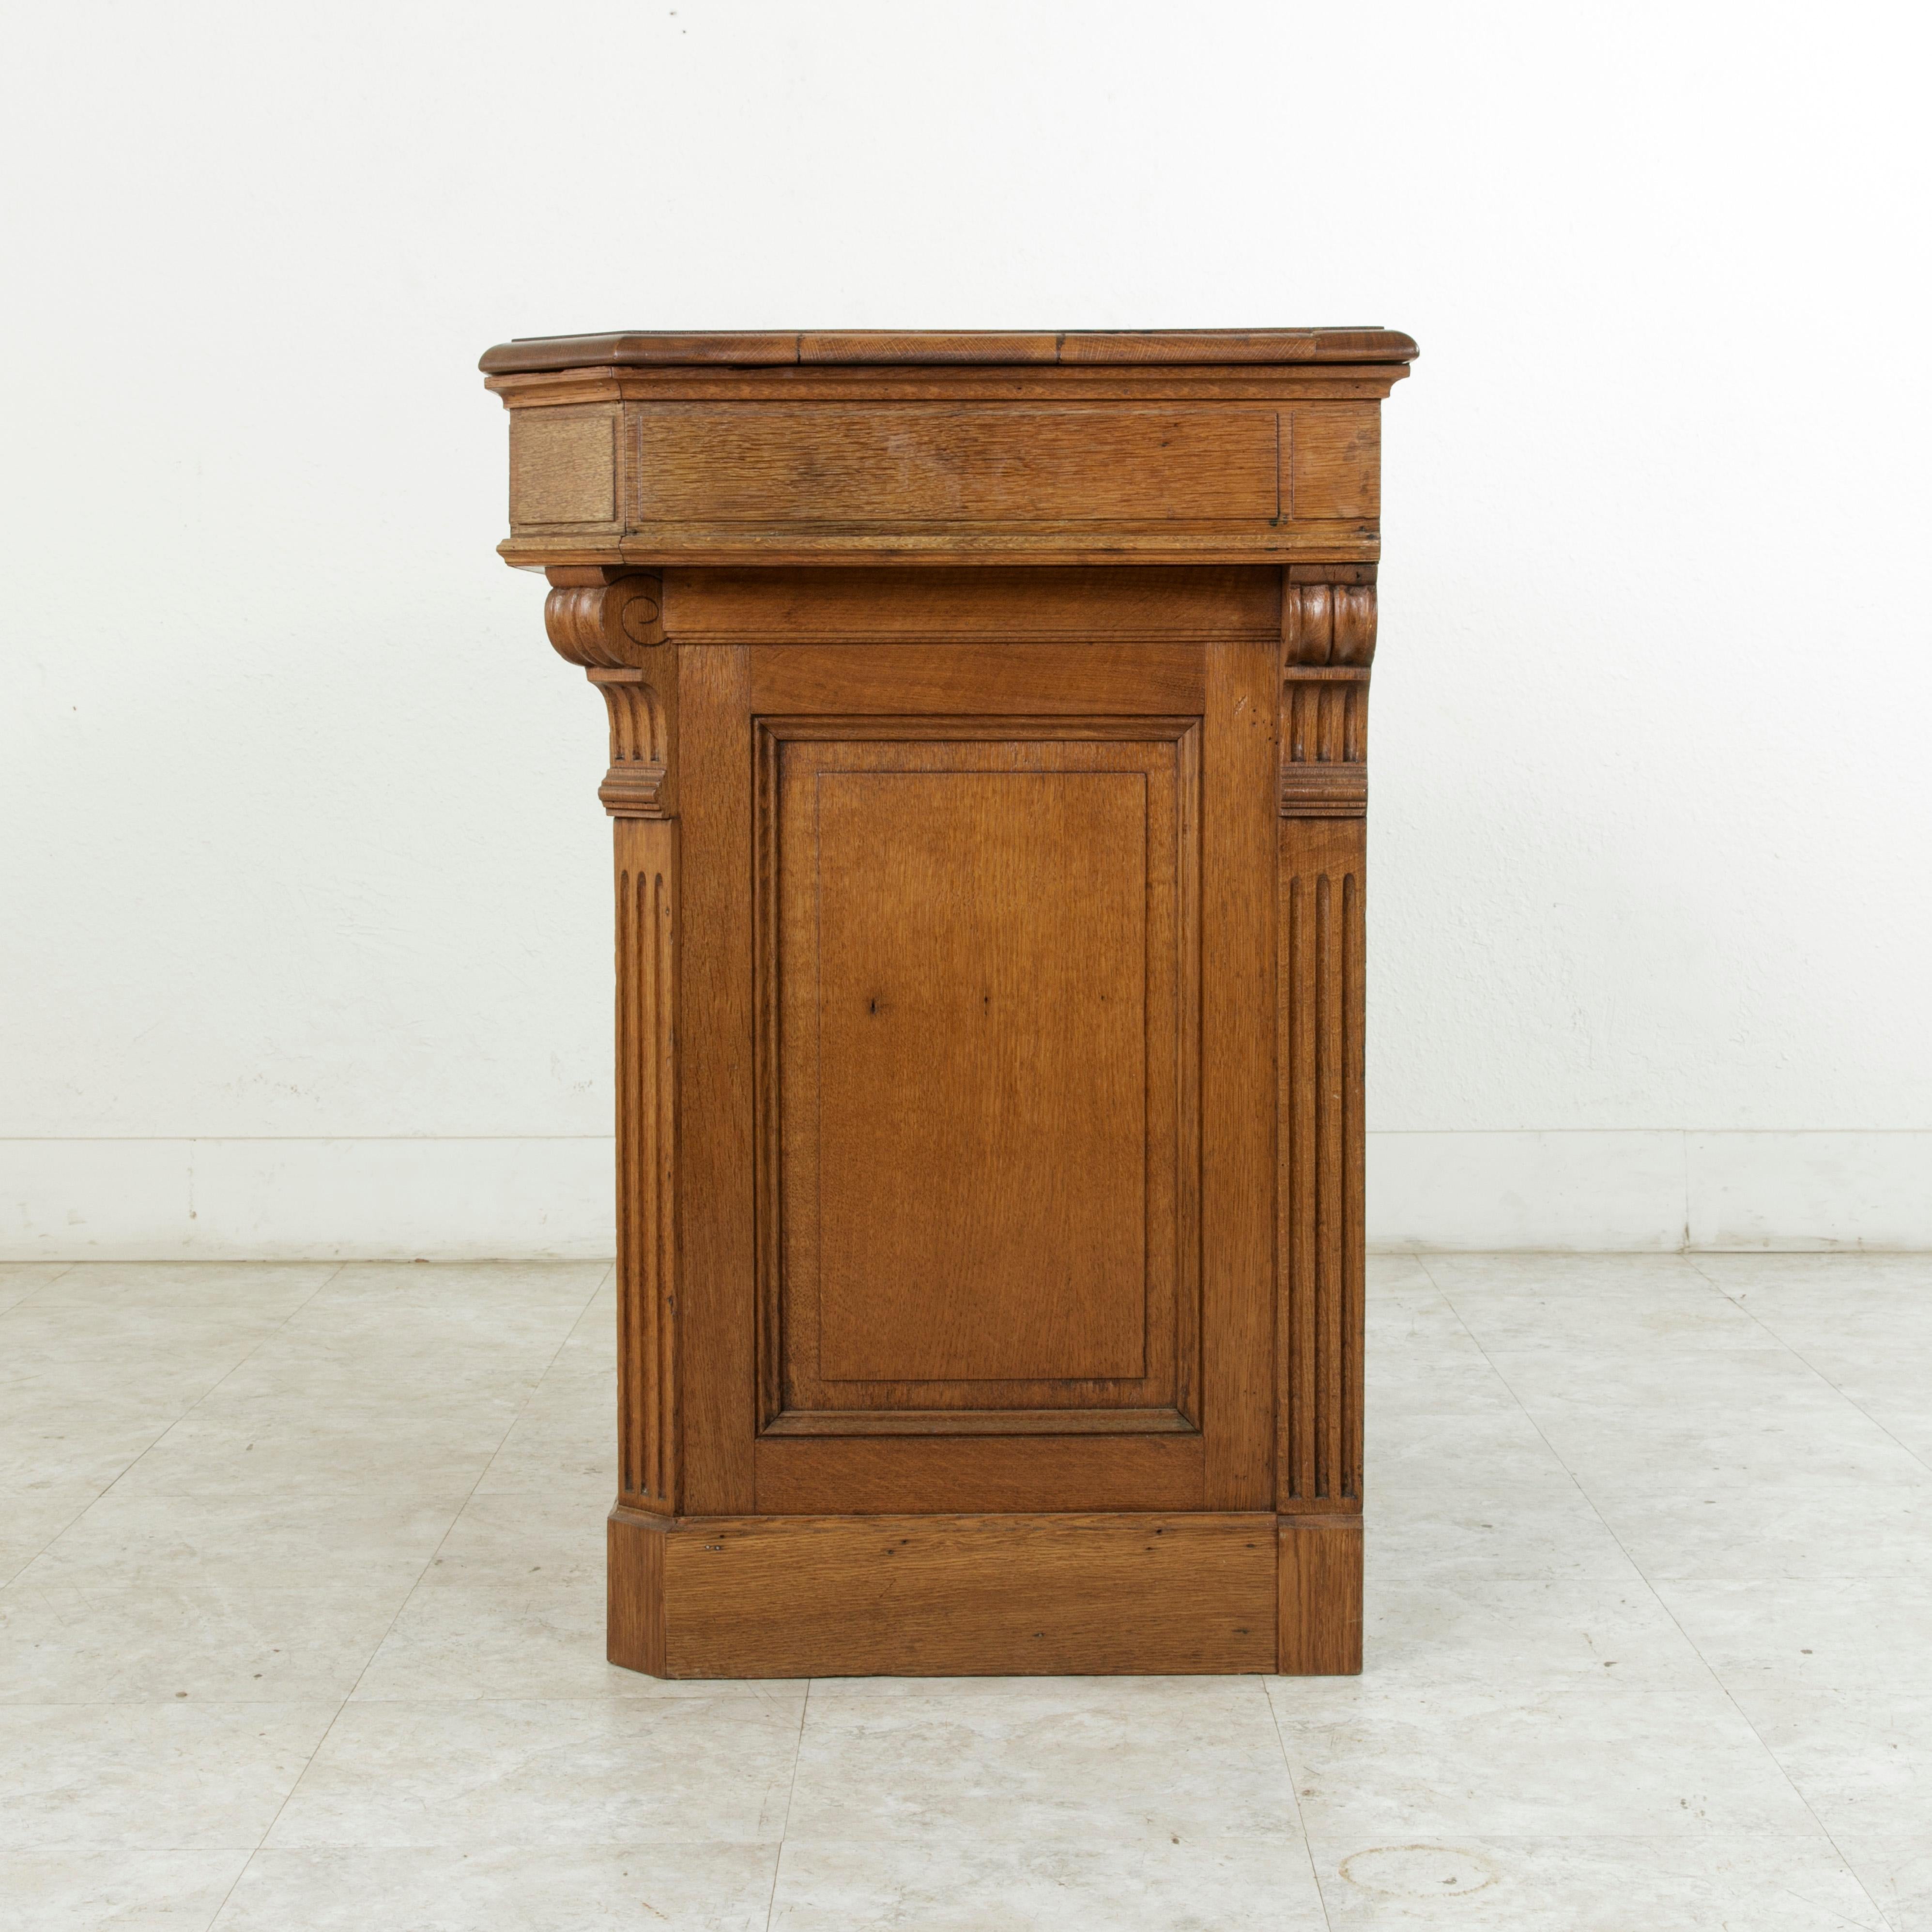 Early 20th Century French Oak Counter, Kitchen Island or Dry Bar, Fluted Columns 1